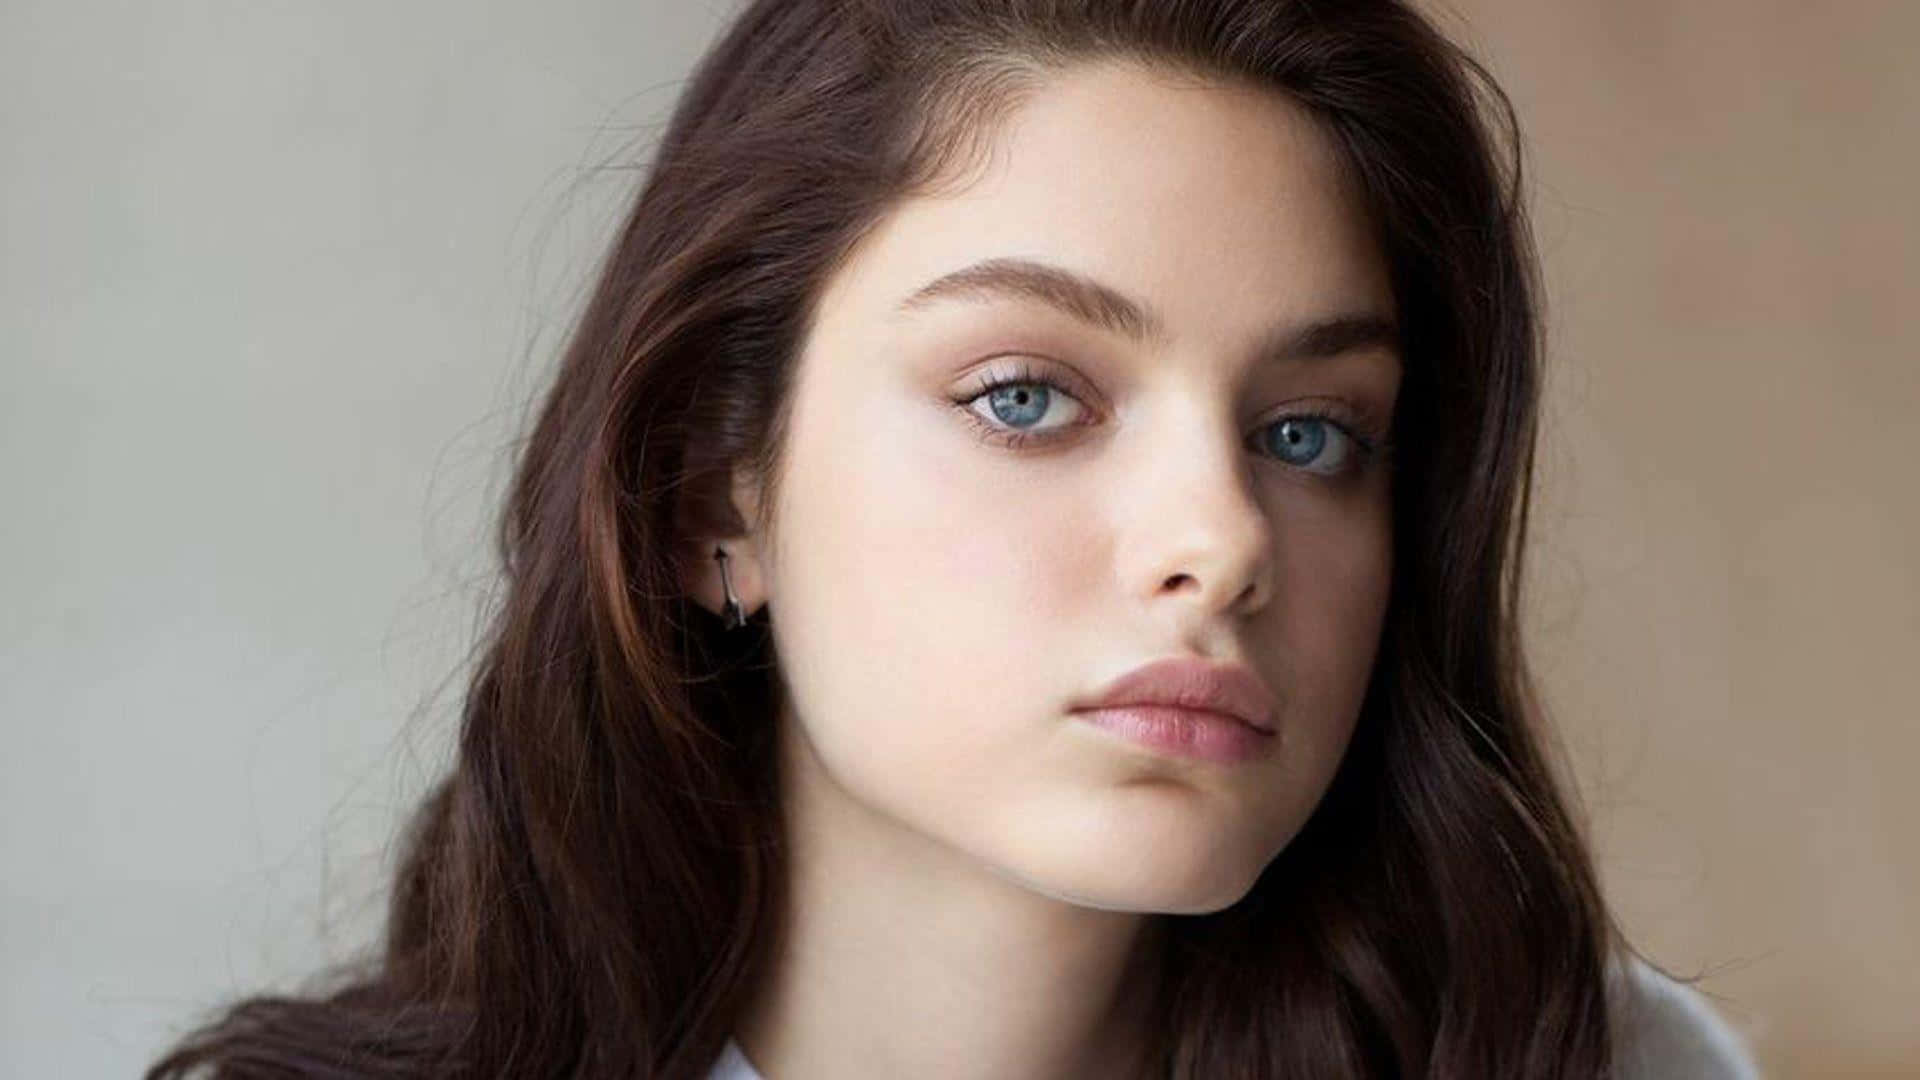 Odeya Rush Stunningly Smiles While Maintaining Eye Contact With The Camera Wallpaper